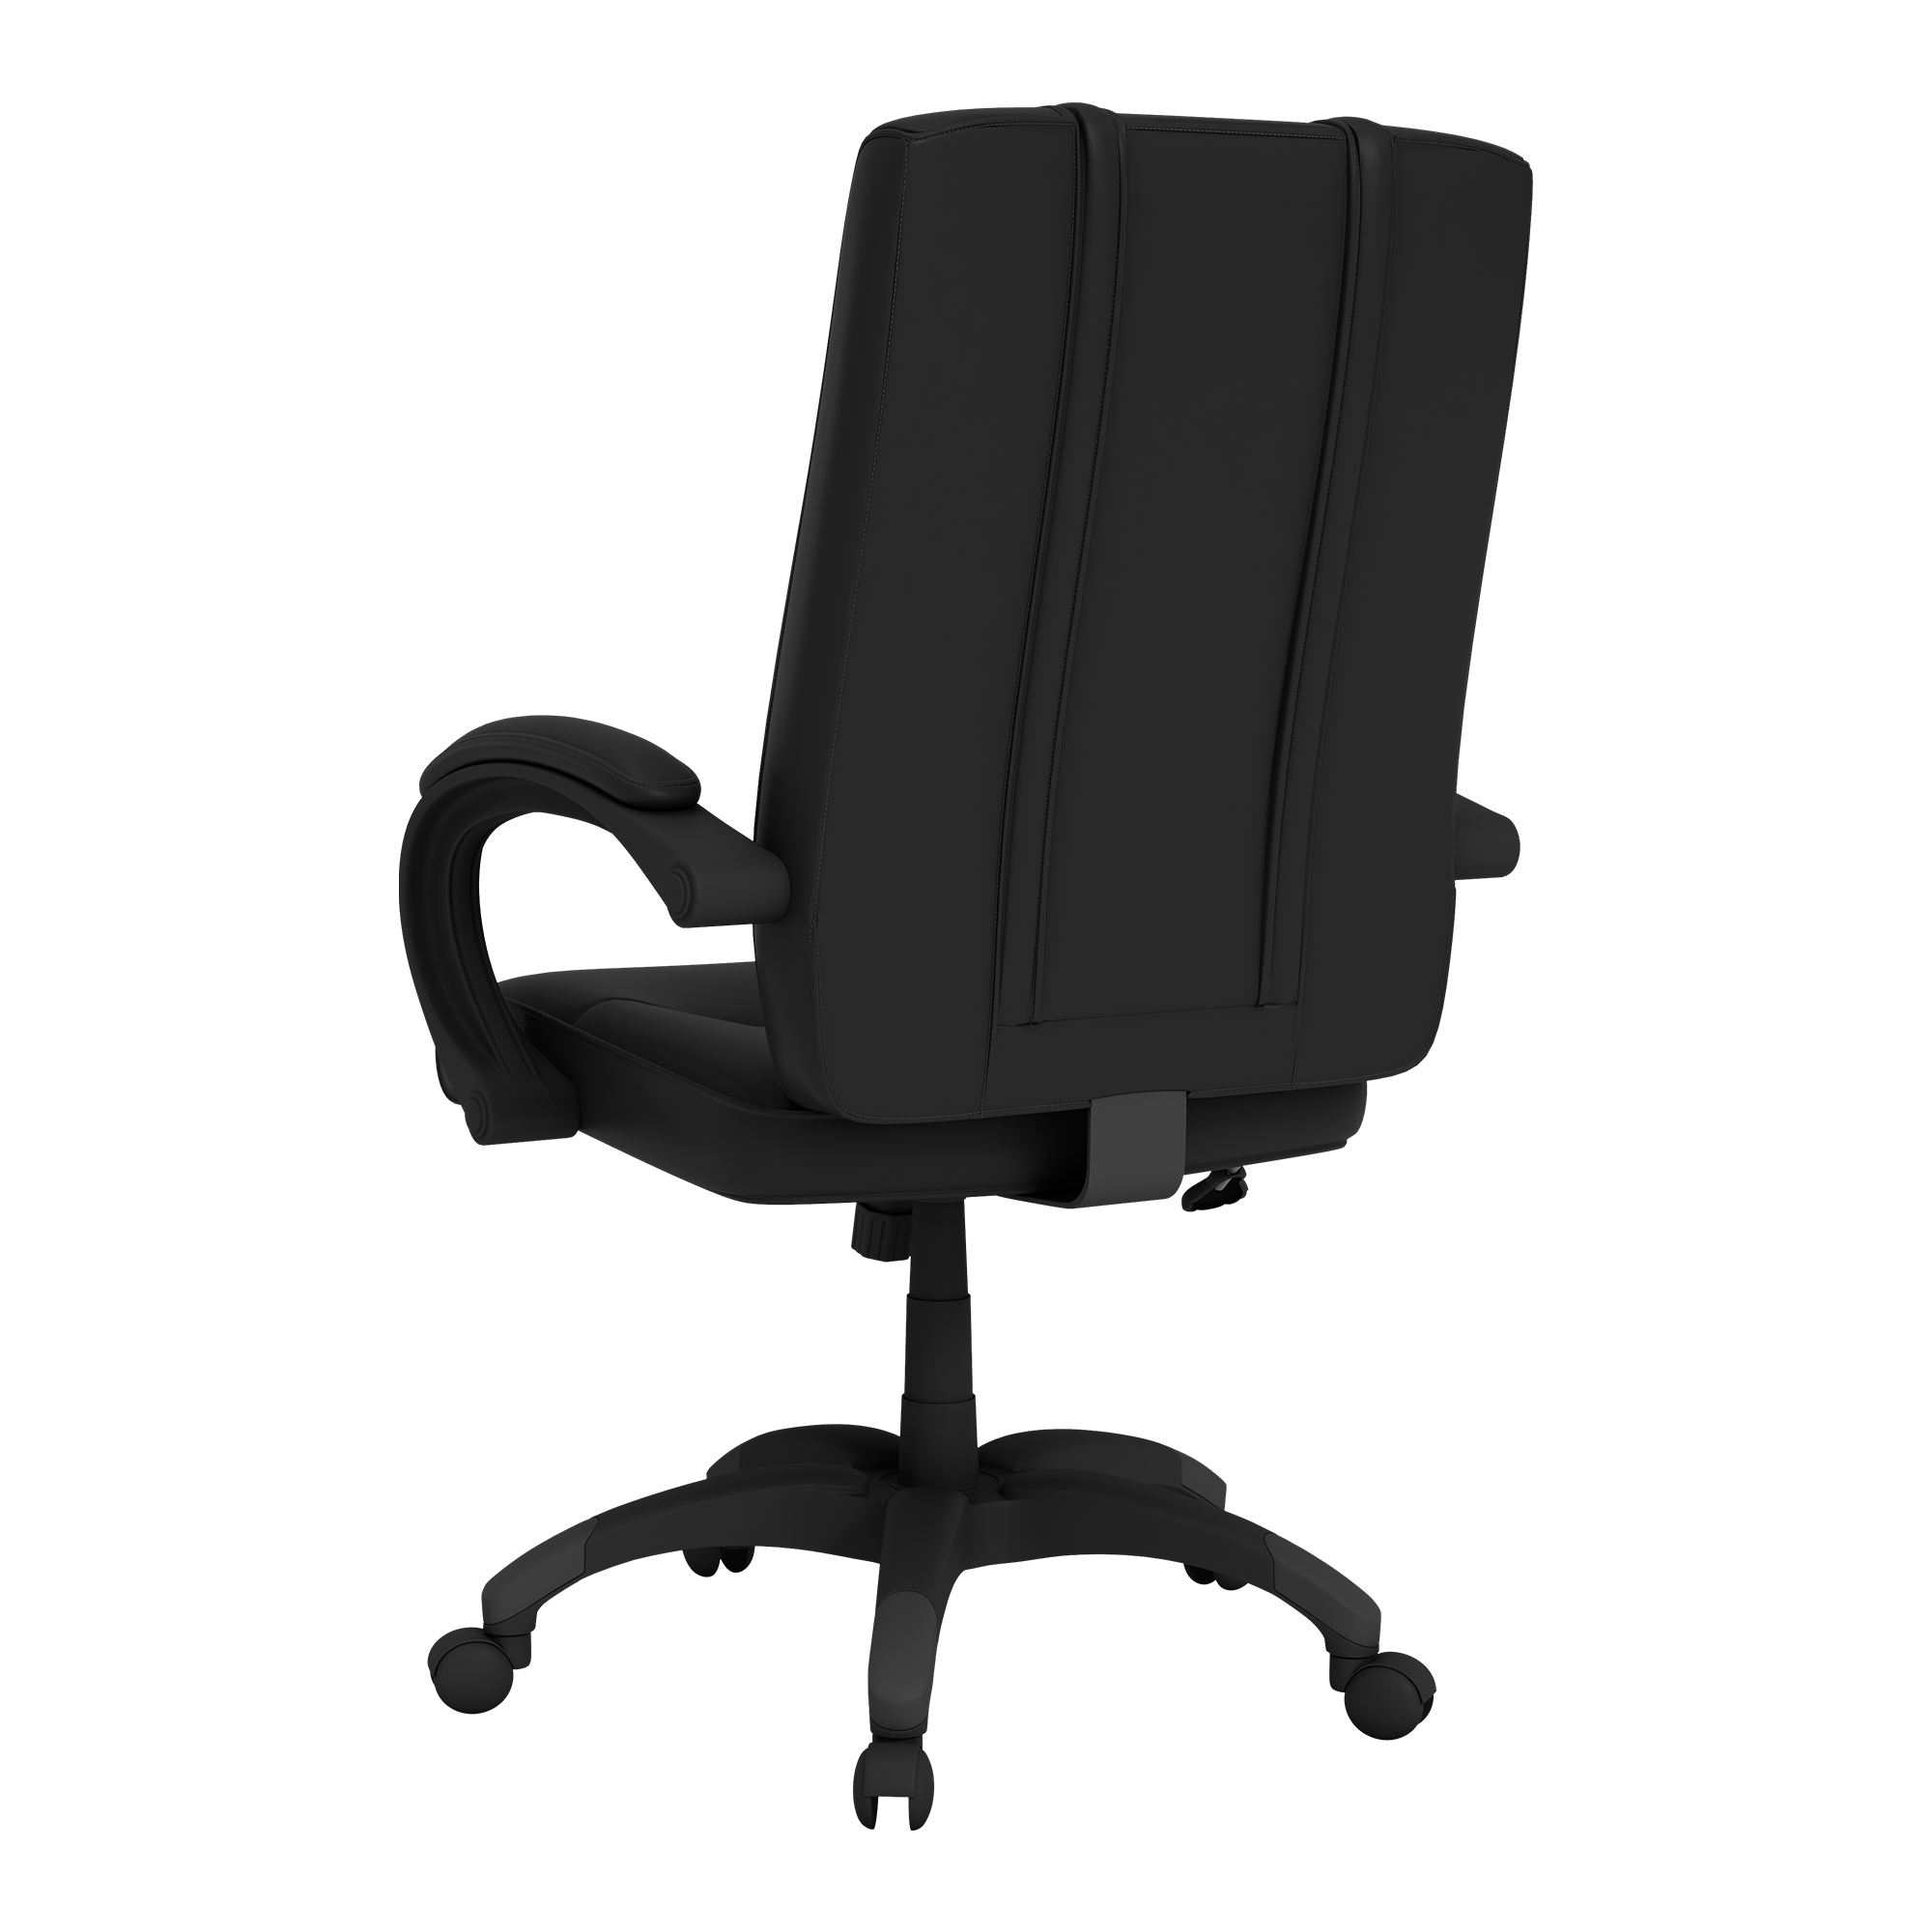 Office Chair 1000 with Pittsburgh Pirates Cooperstown